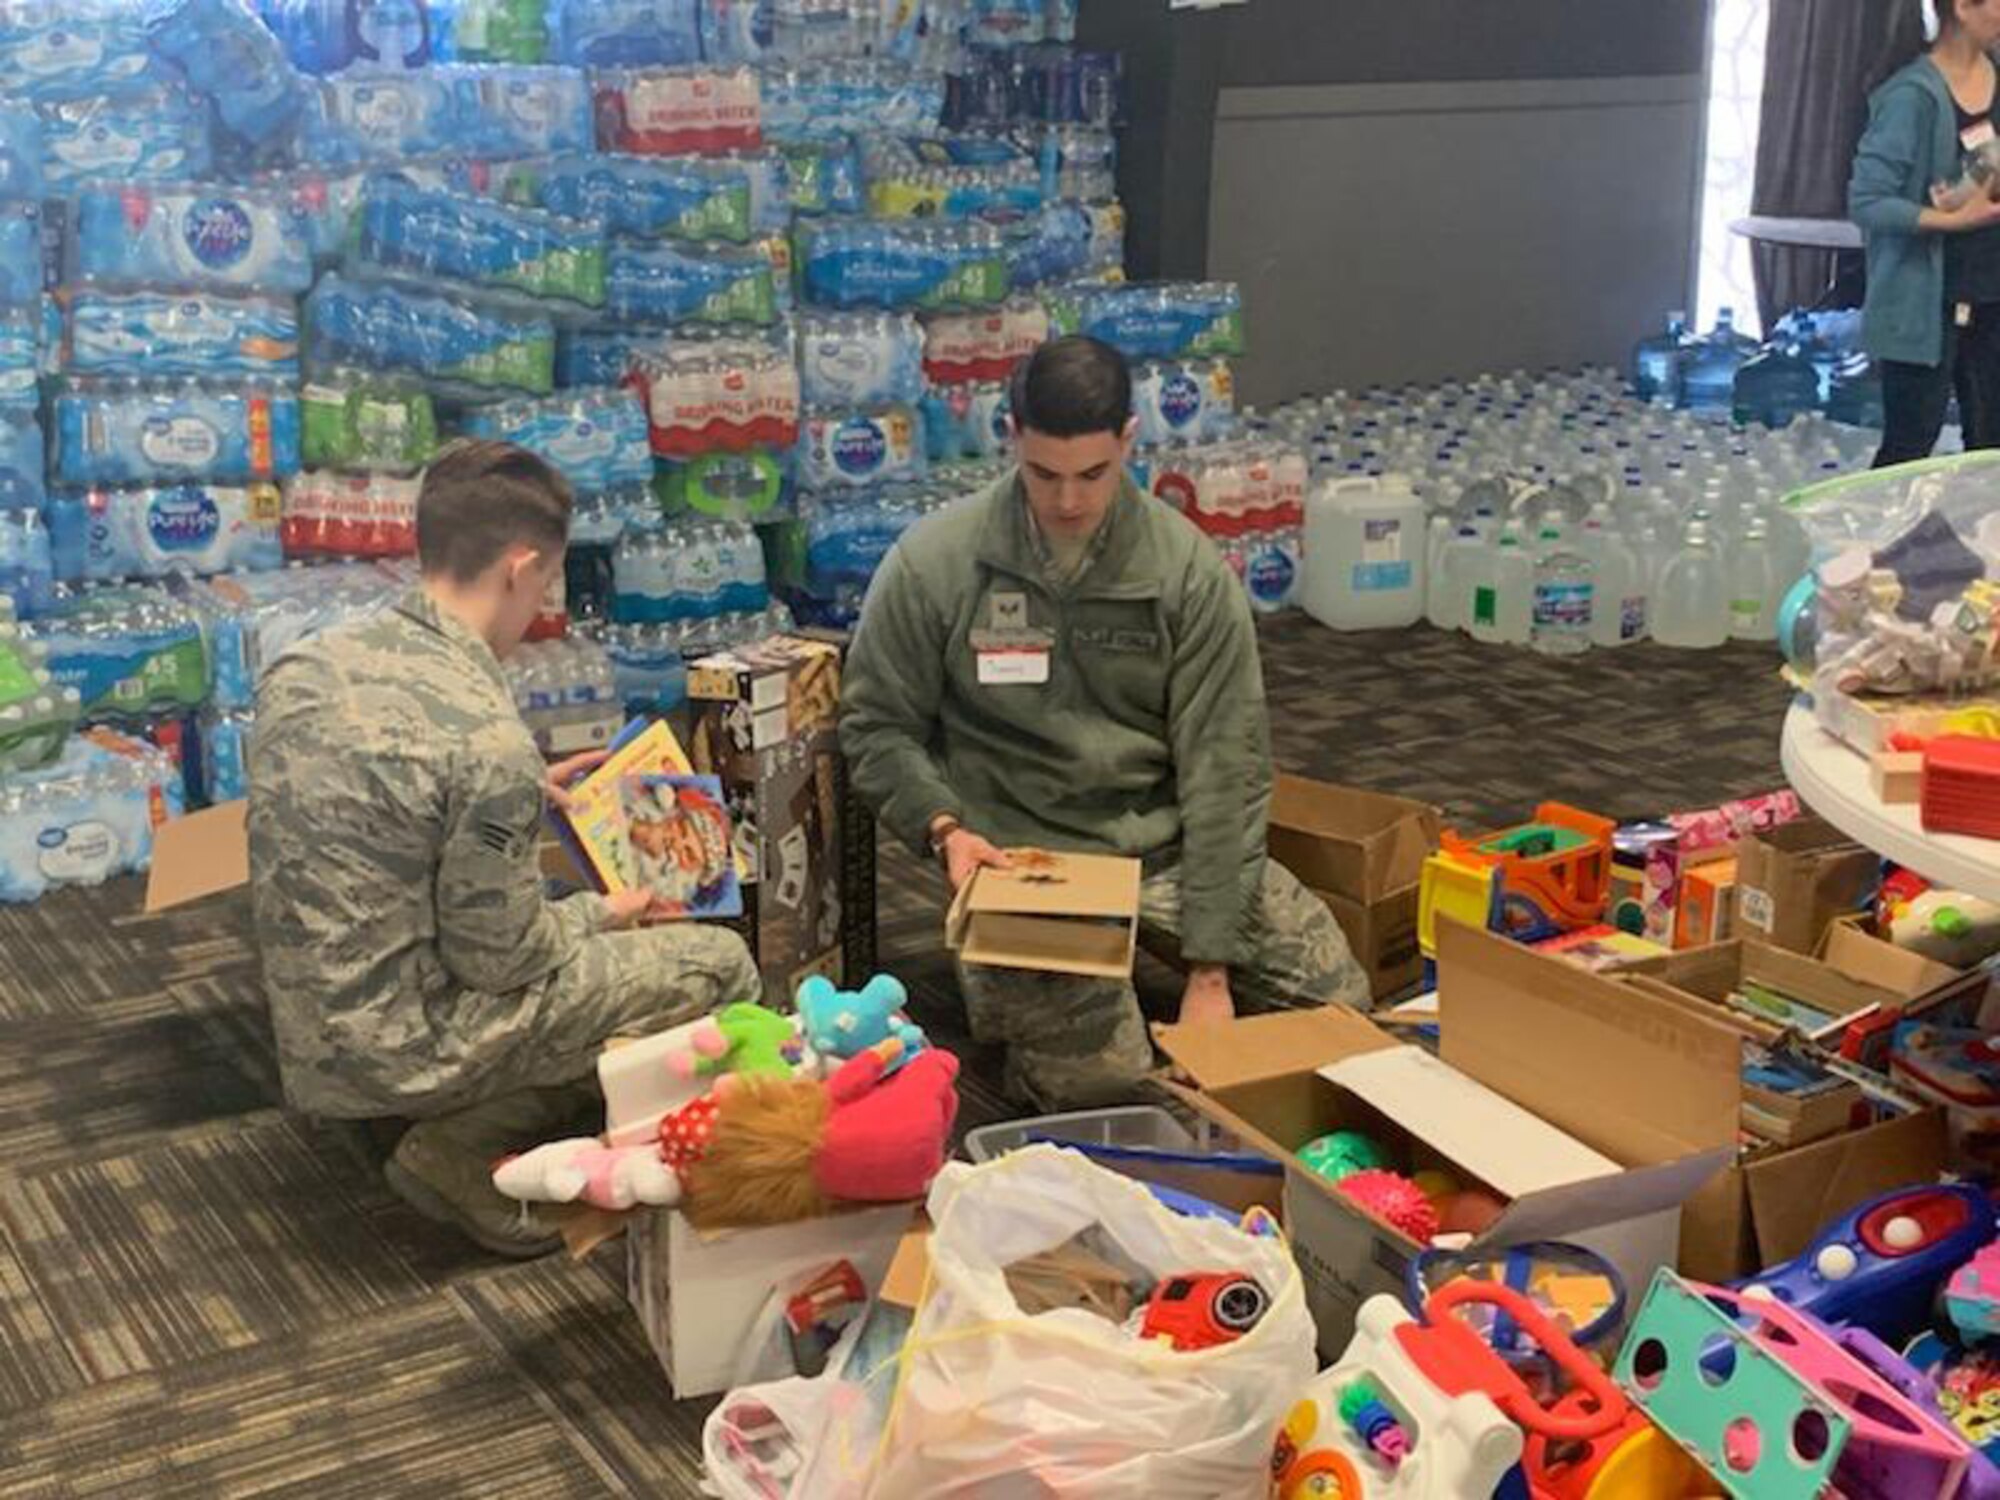 U.S. Air Force Airmen with the 20th Intelligence Squadron, 363rd Intelligence, Surveillance and Reconnaissance Wing, sort and distribute clothes, cleaning supplies, toys and food at the Bellevue Christian Center in Nebraska, March 18-21, 2019. Airmen, civilian and industry partners from the 20th IS volunteered to provide assistance and relief efforts to those affected by recent flooding in Nebraska and Iowa. (Courtesy photo)